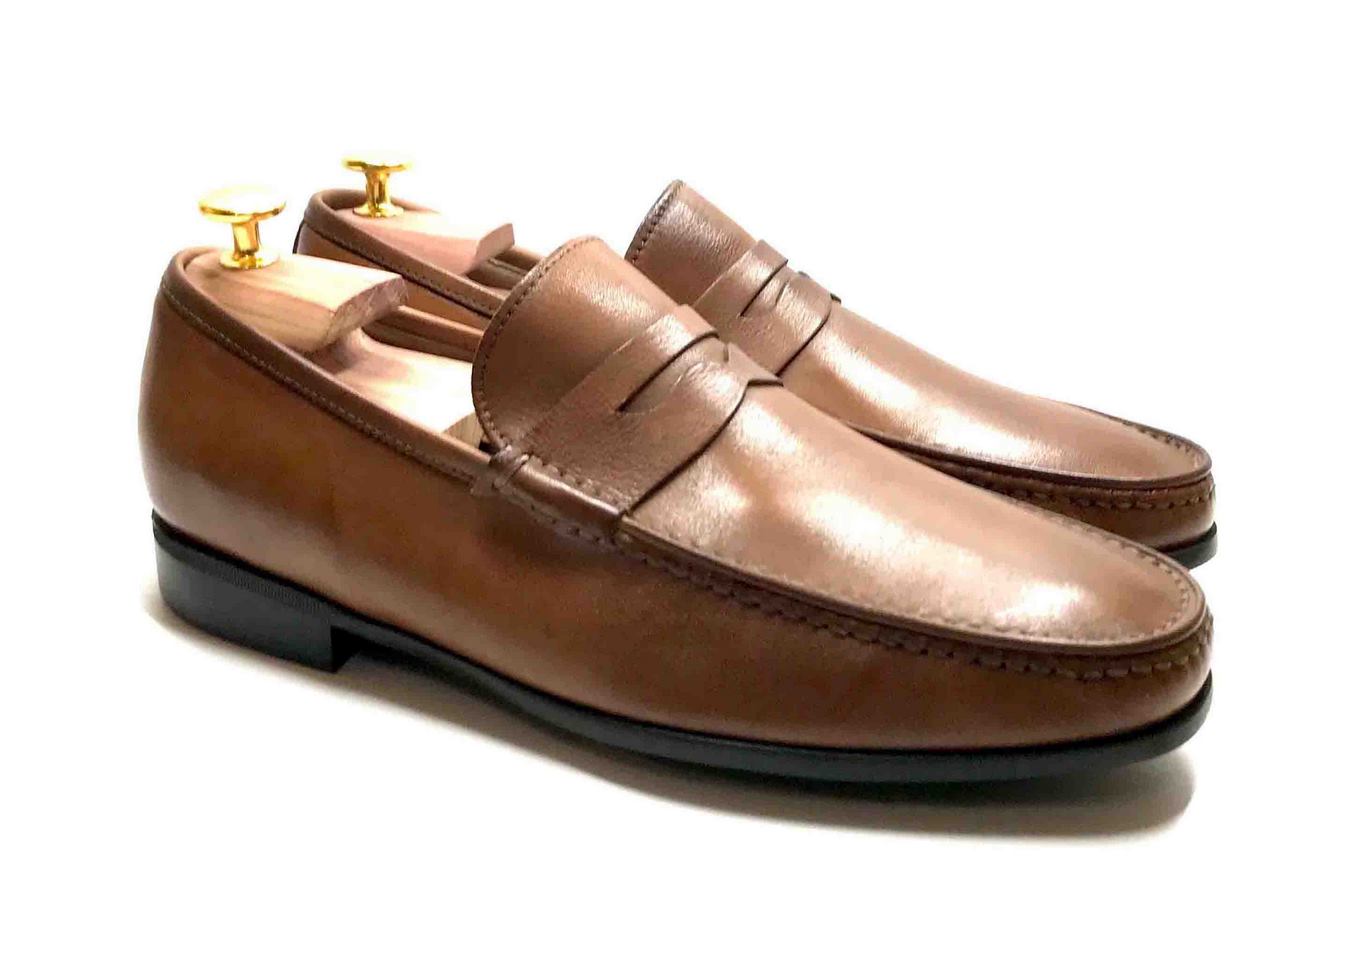 Comfort Loafer with removable insoles light Brown leather